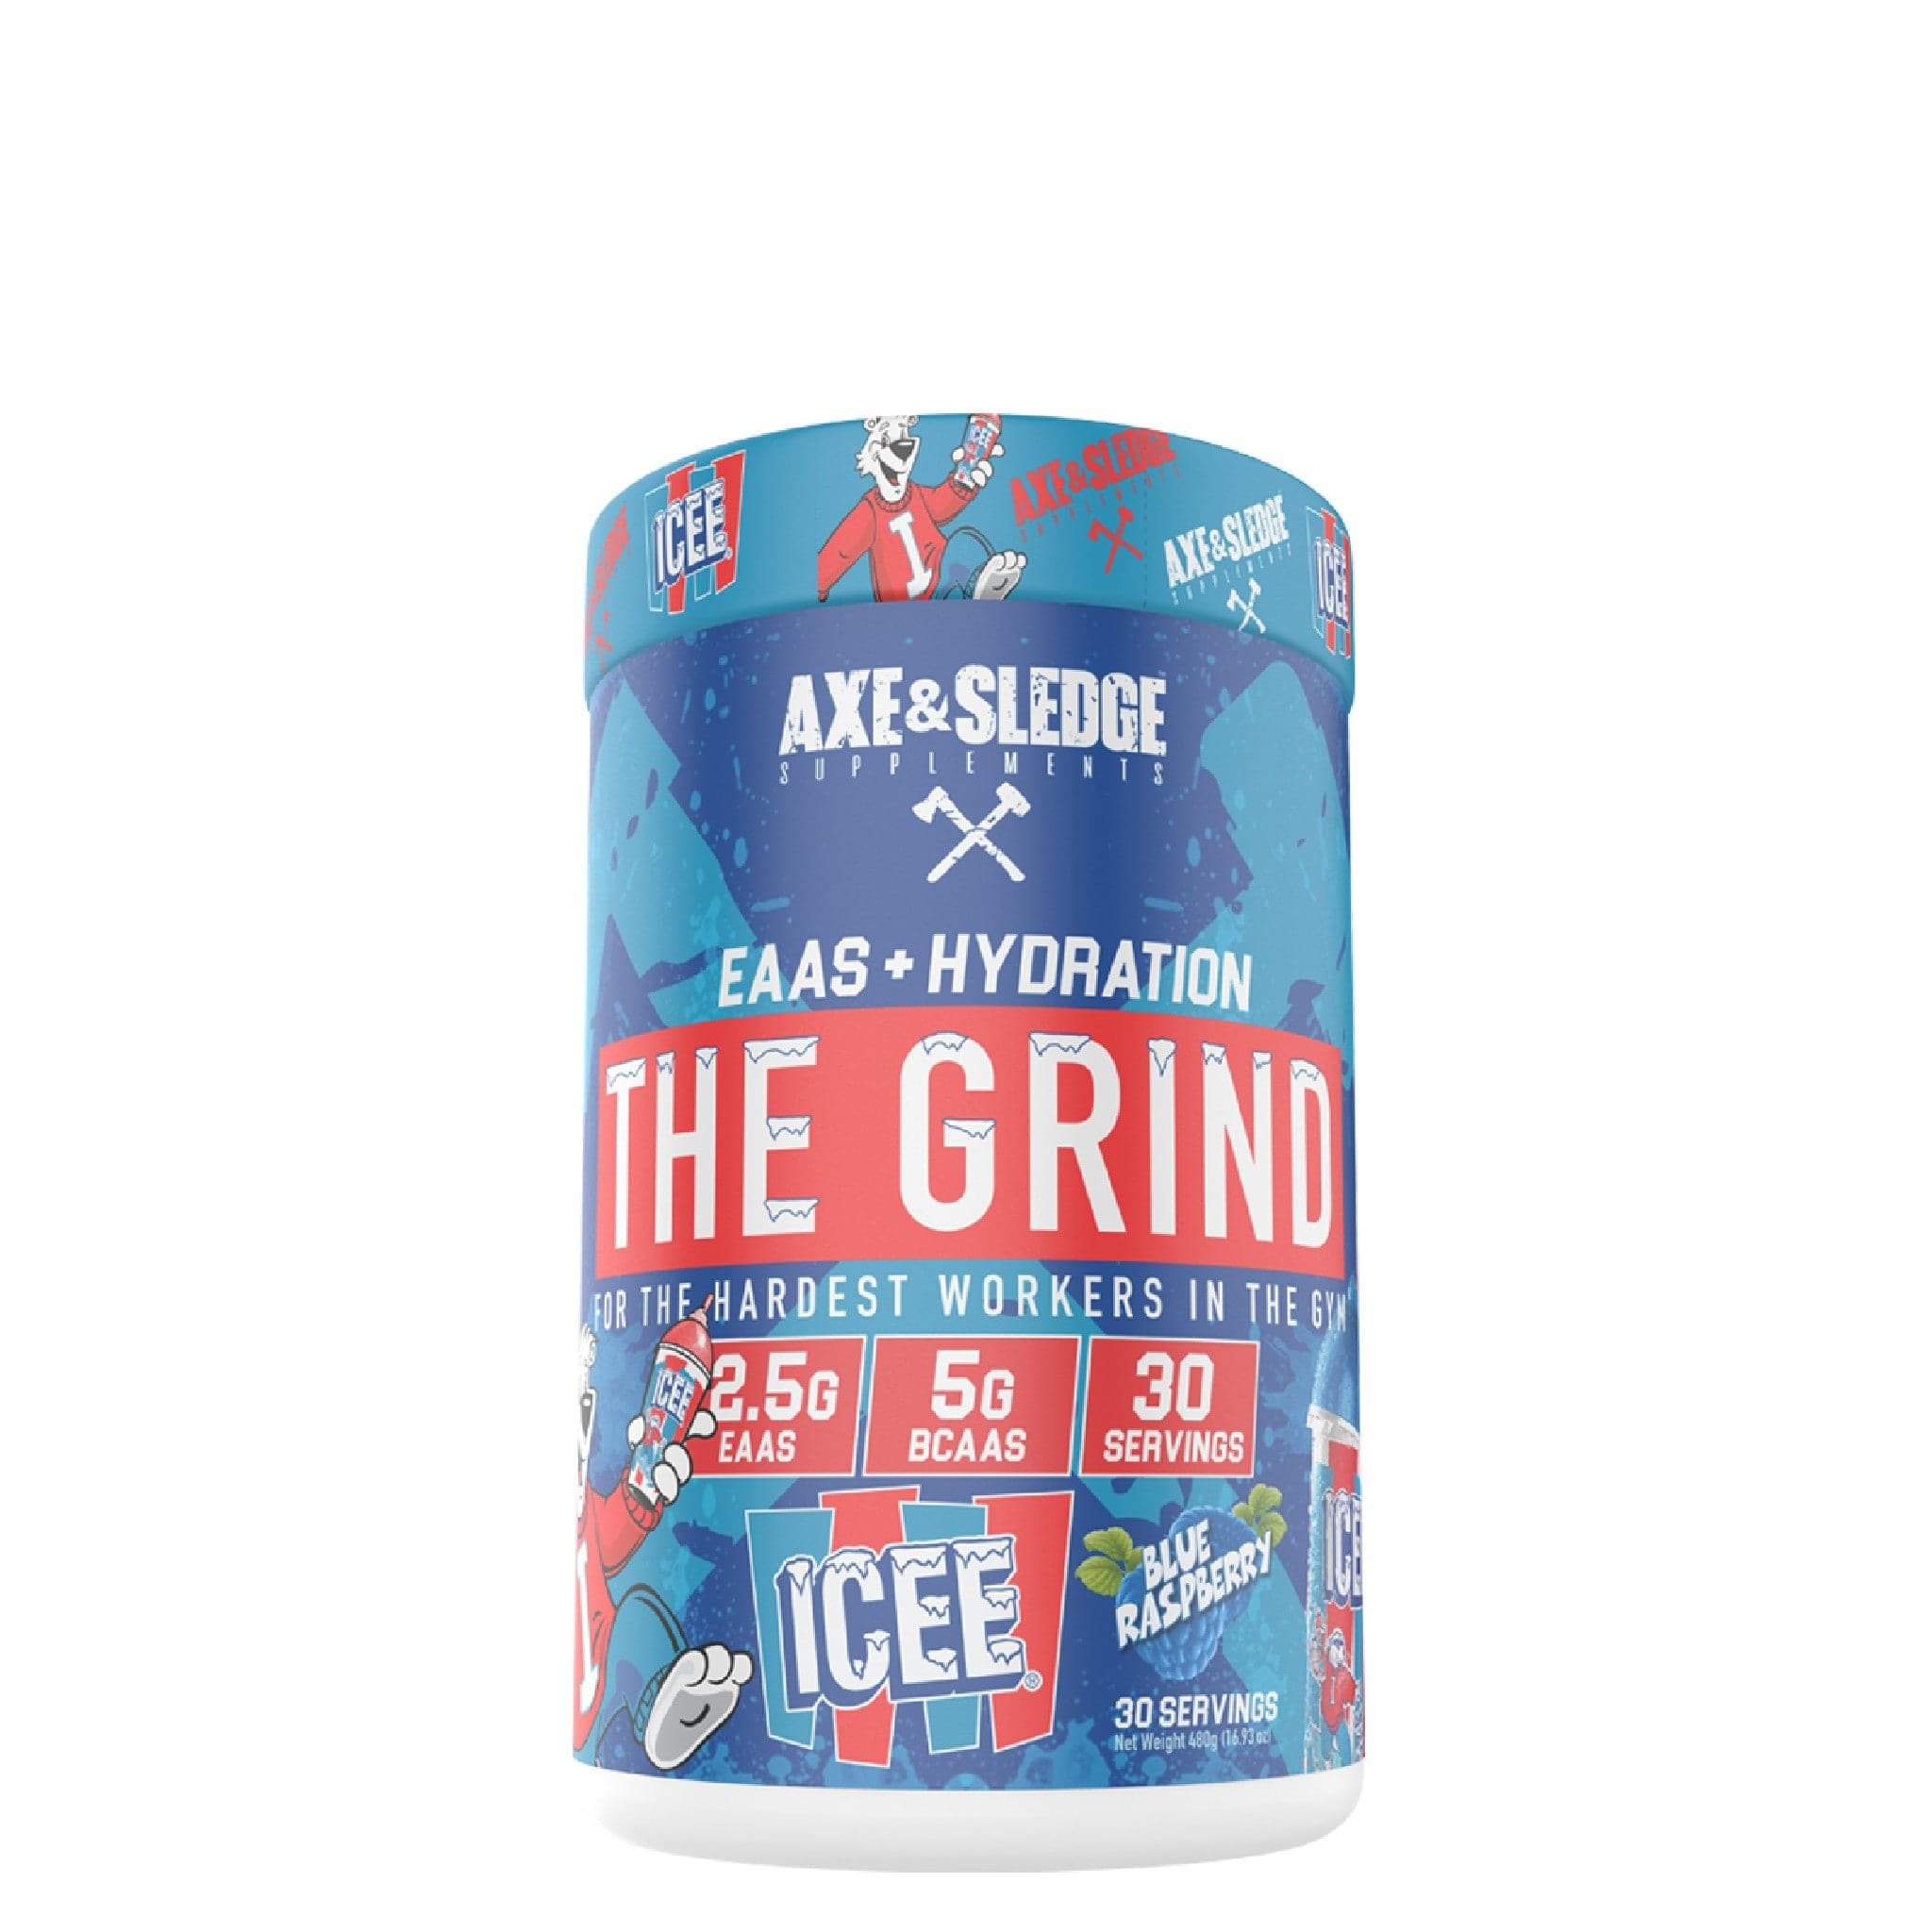 Axe & Luge The Grind 30 portions